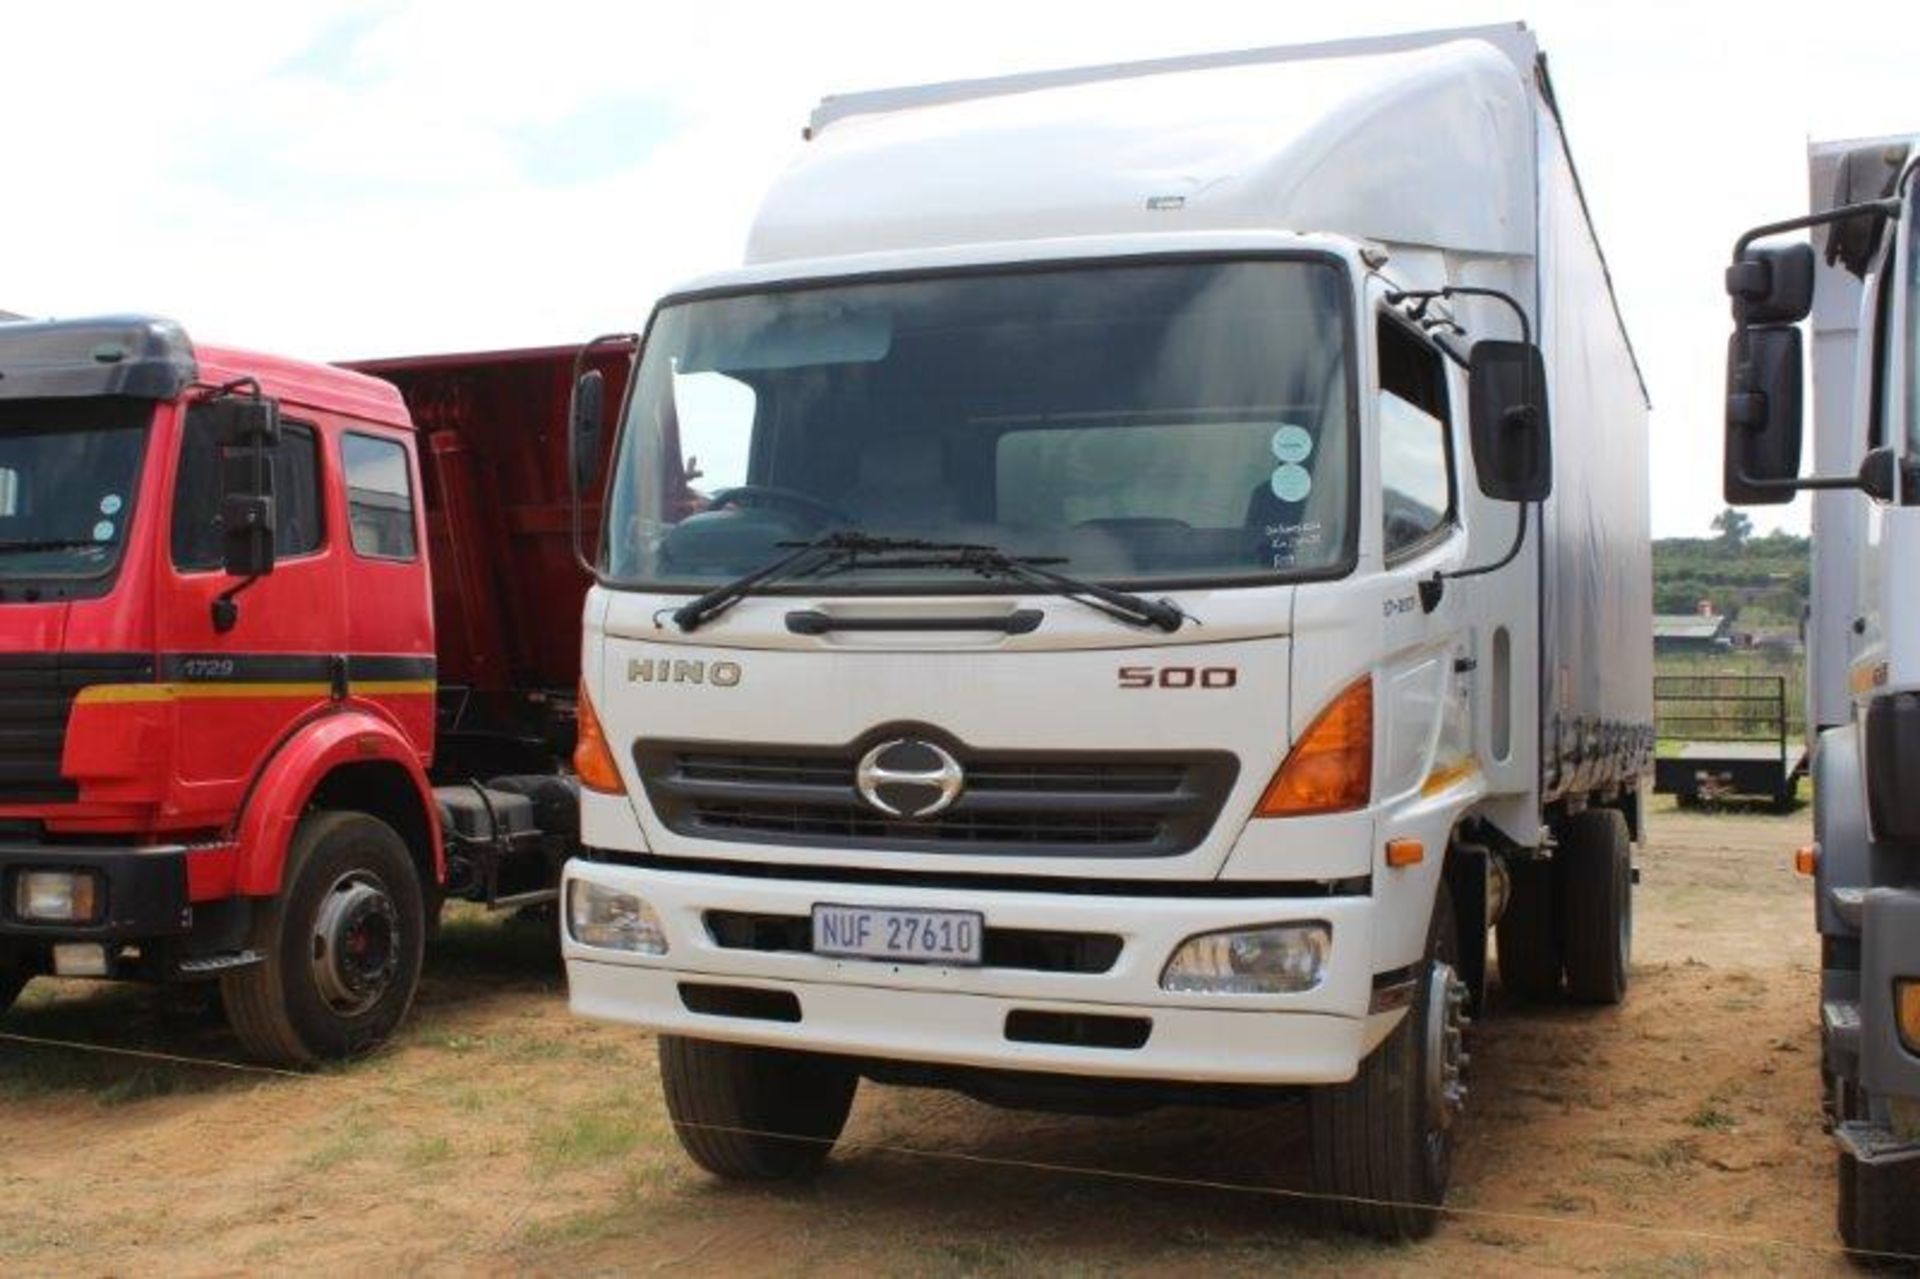 2004 HINO 500 CURTAIN SIDE - Image 2 of 6